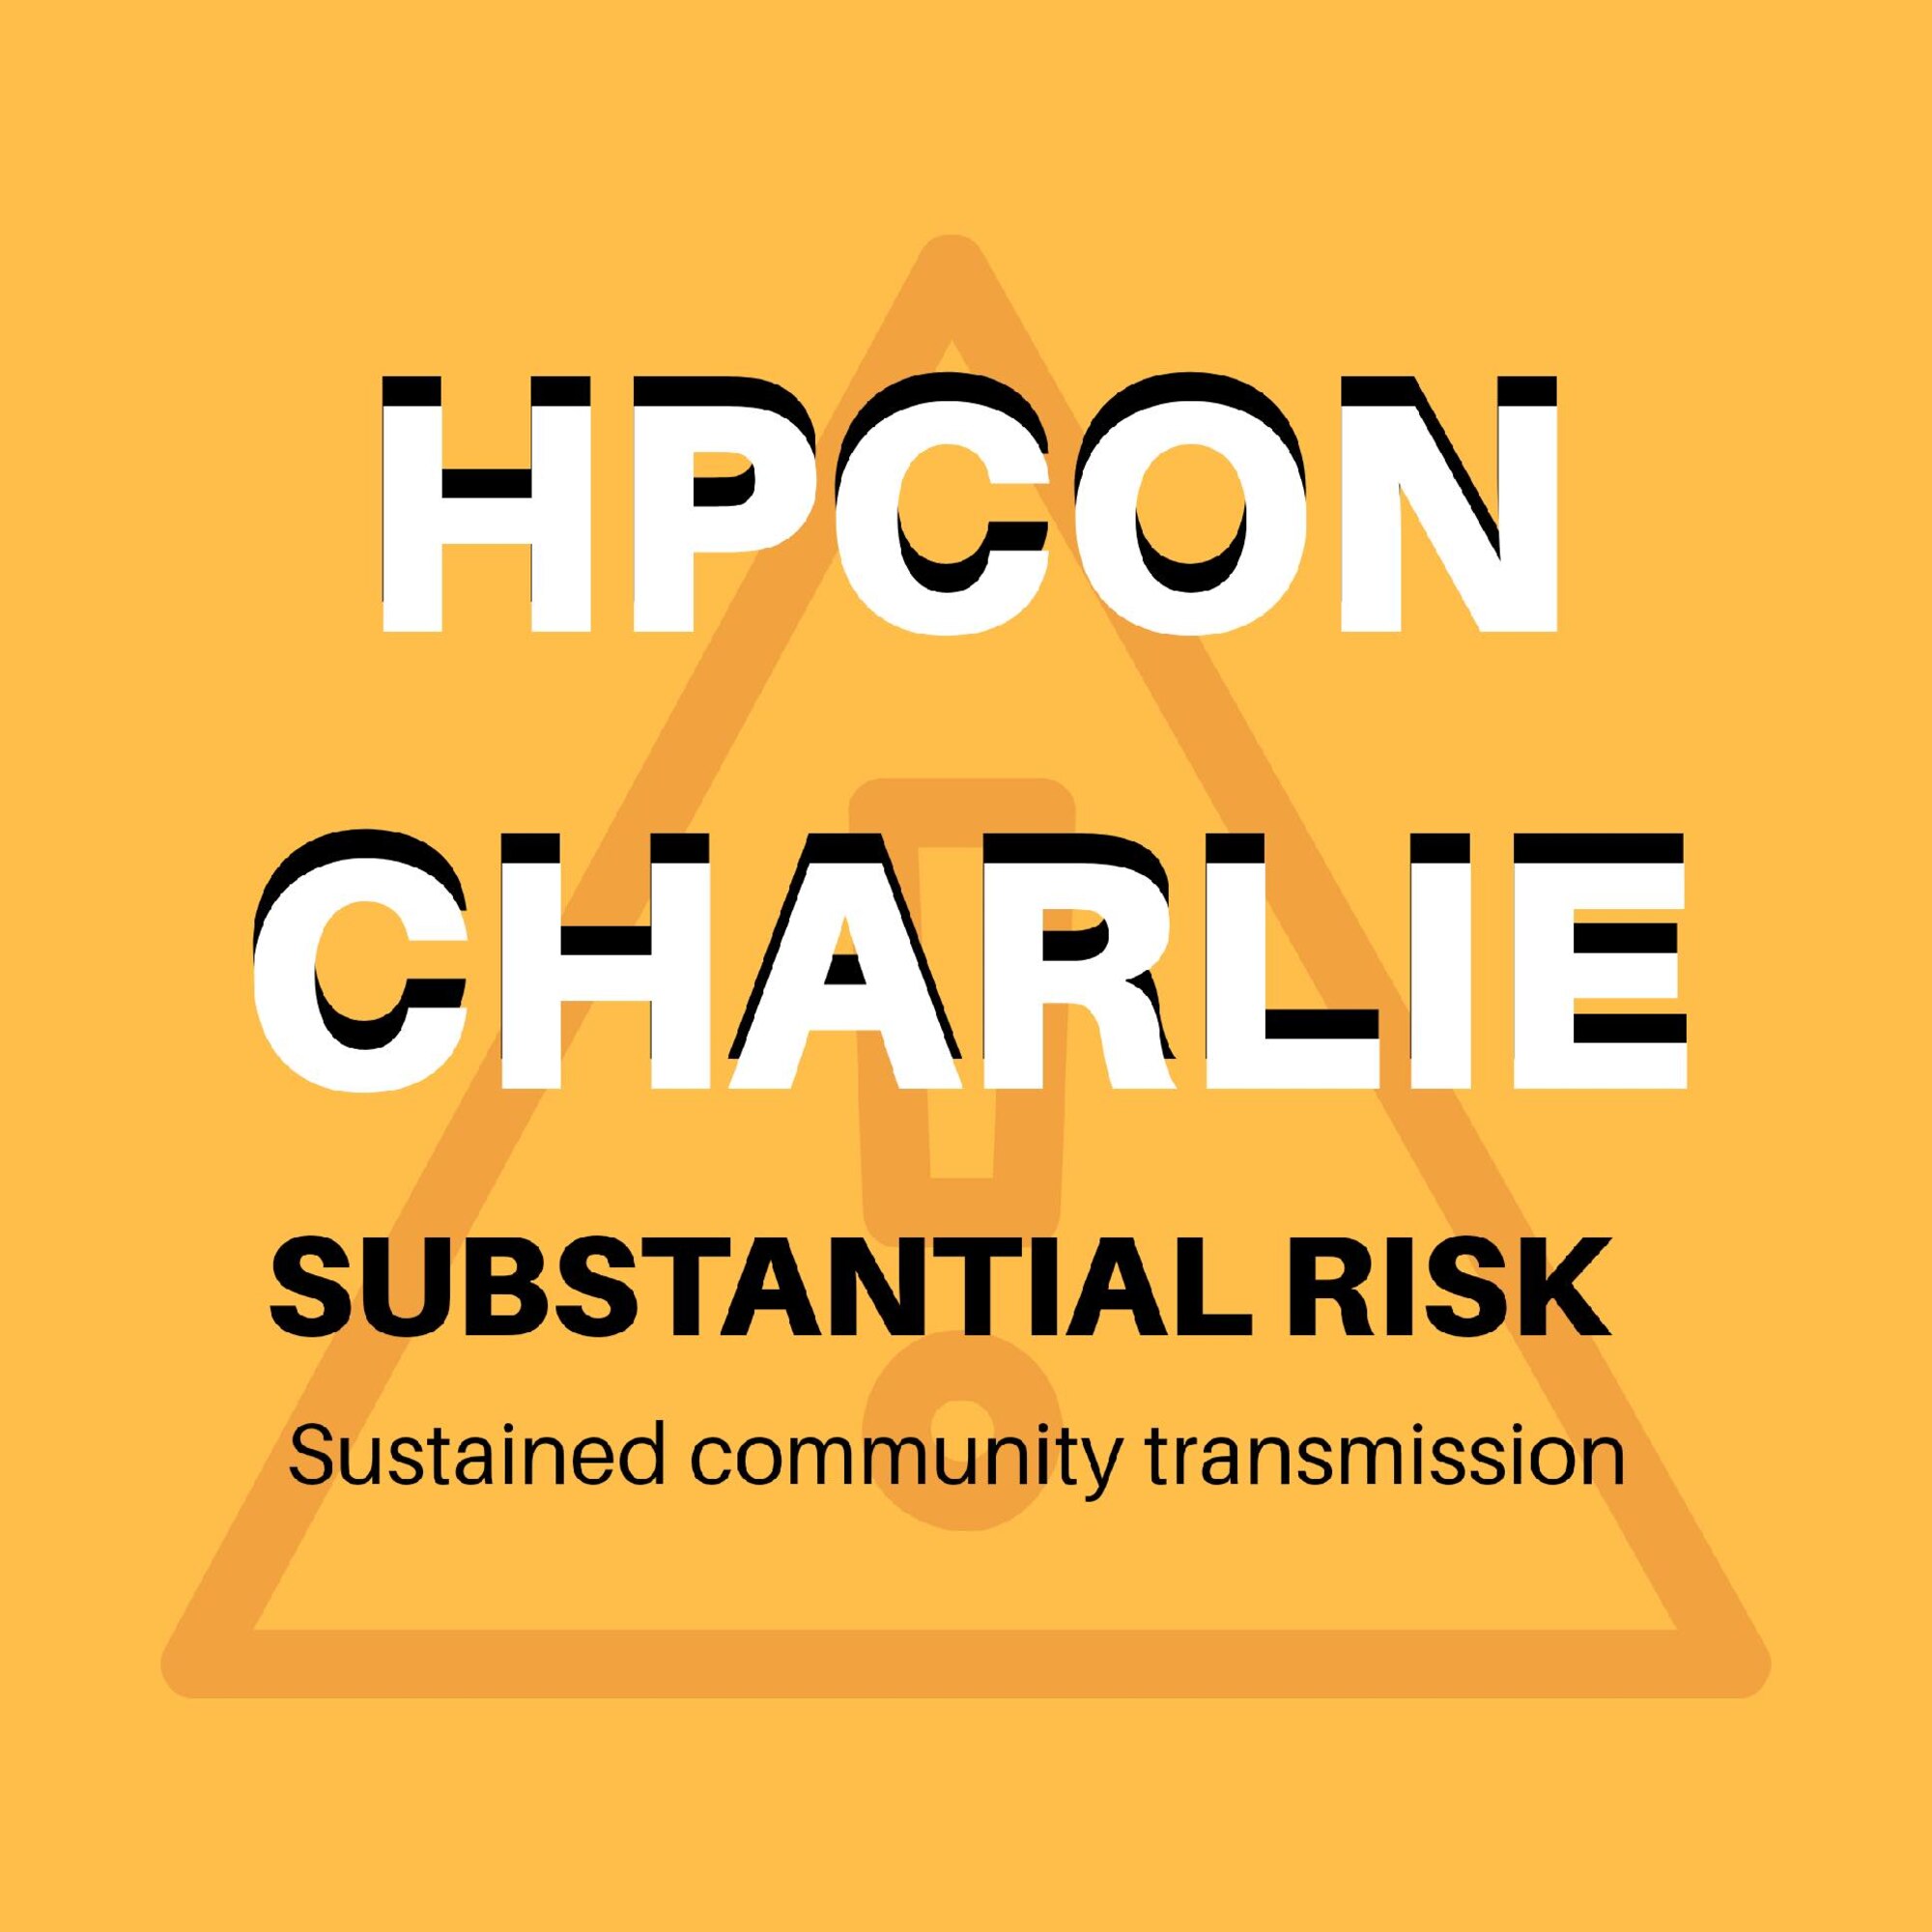 Peterson Air Force Base raises the HPCON level to Charlie.